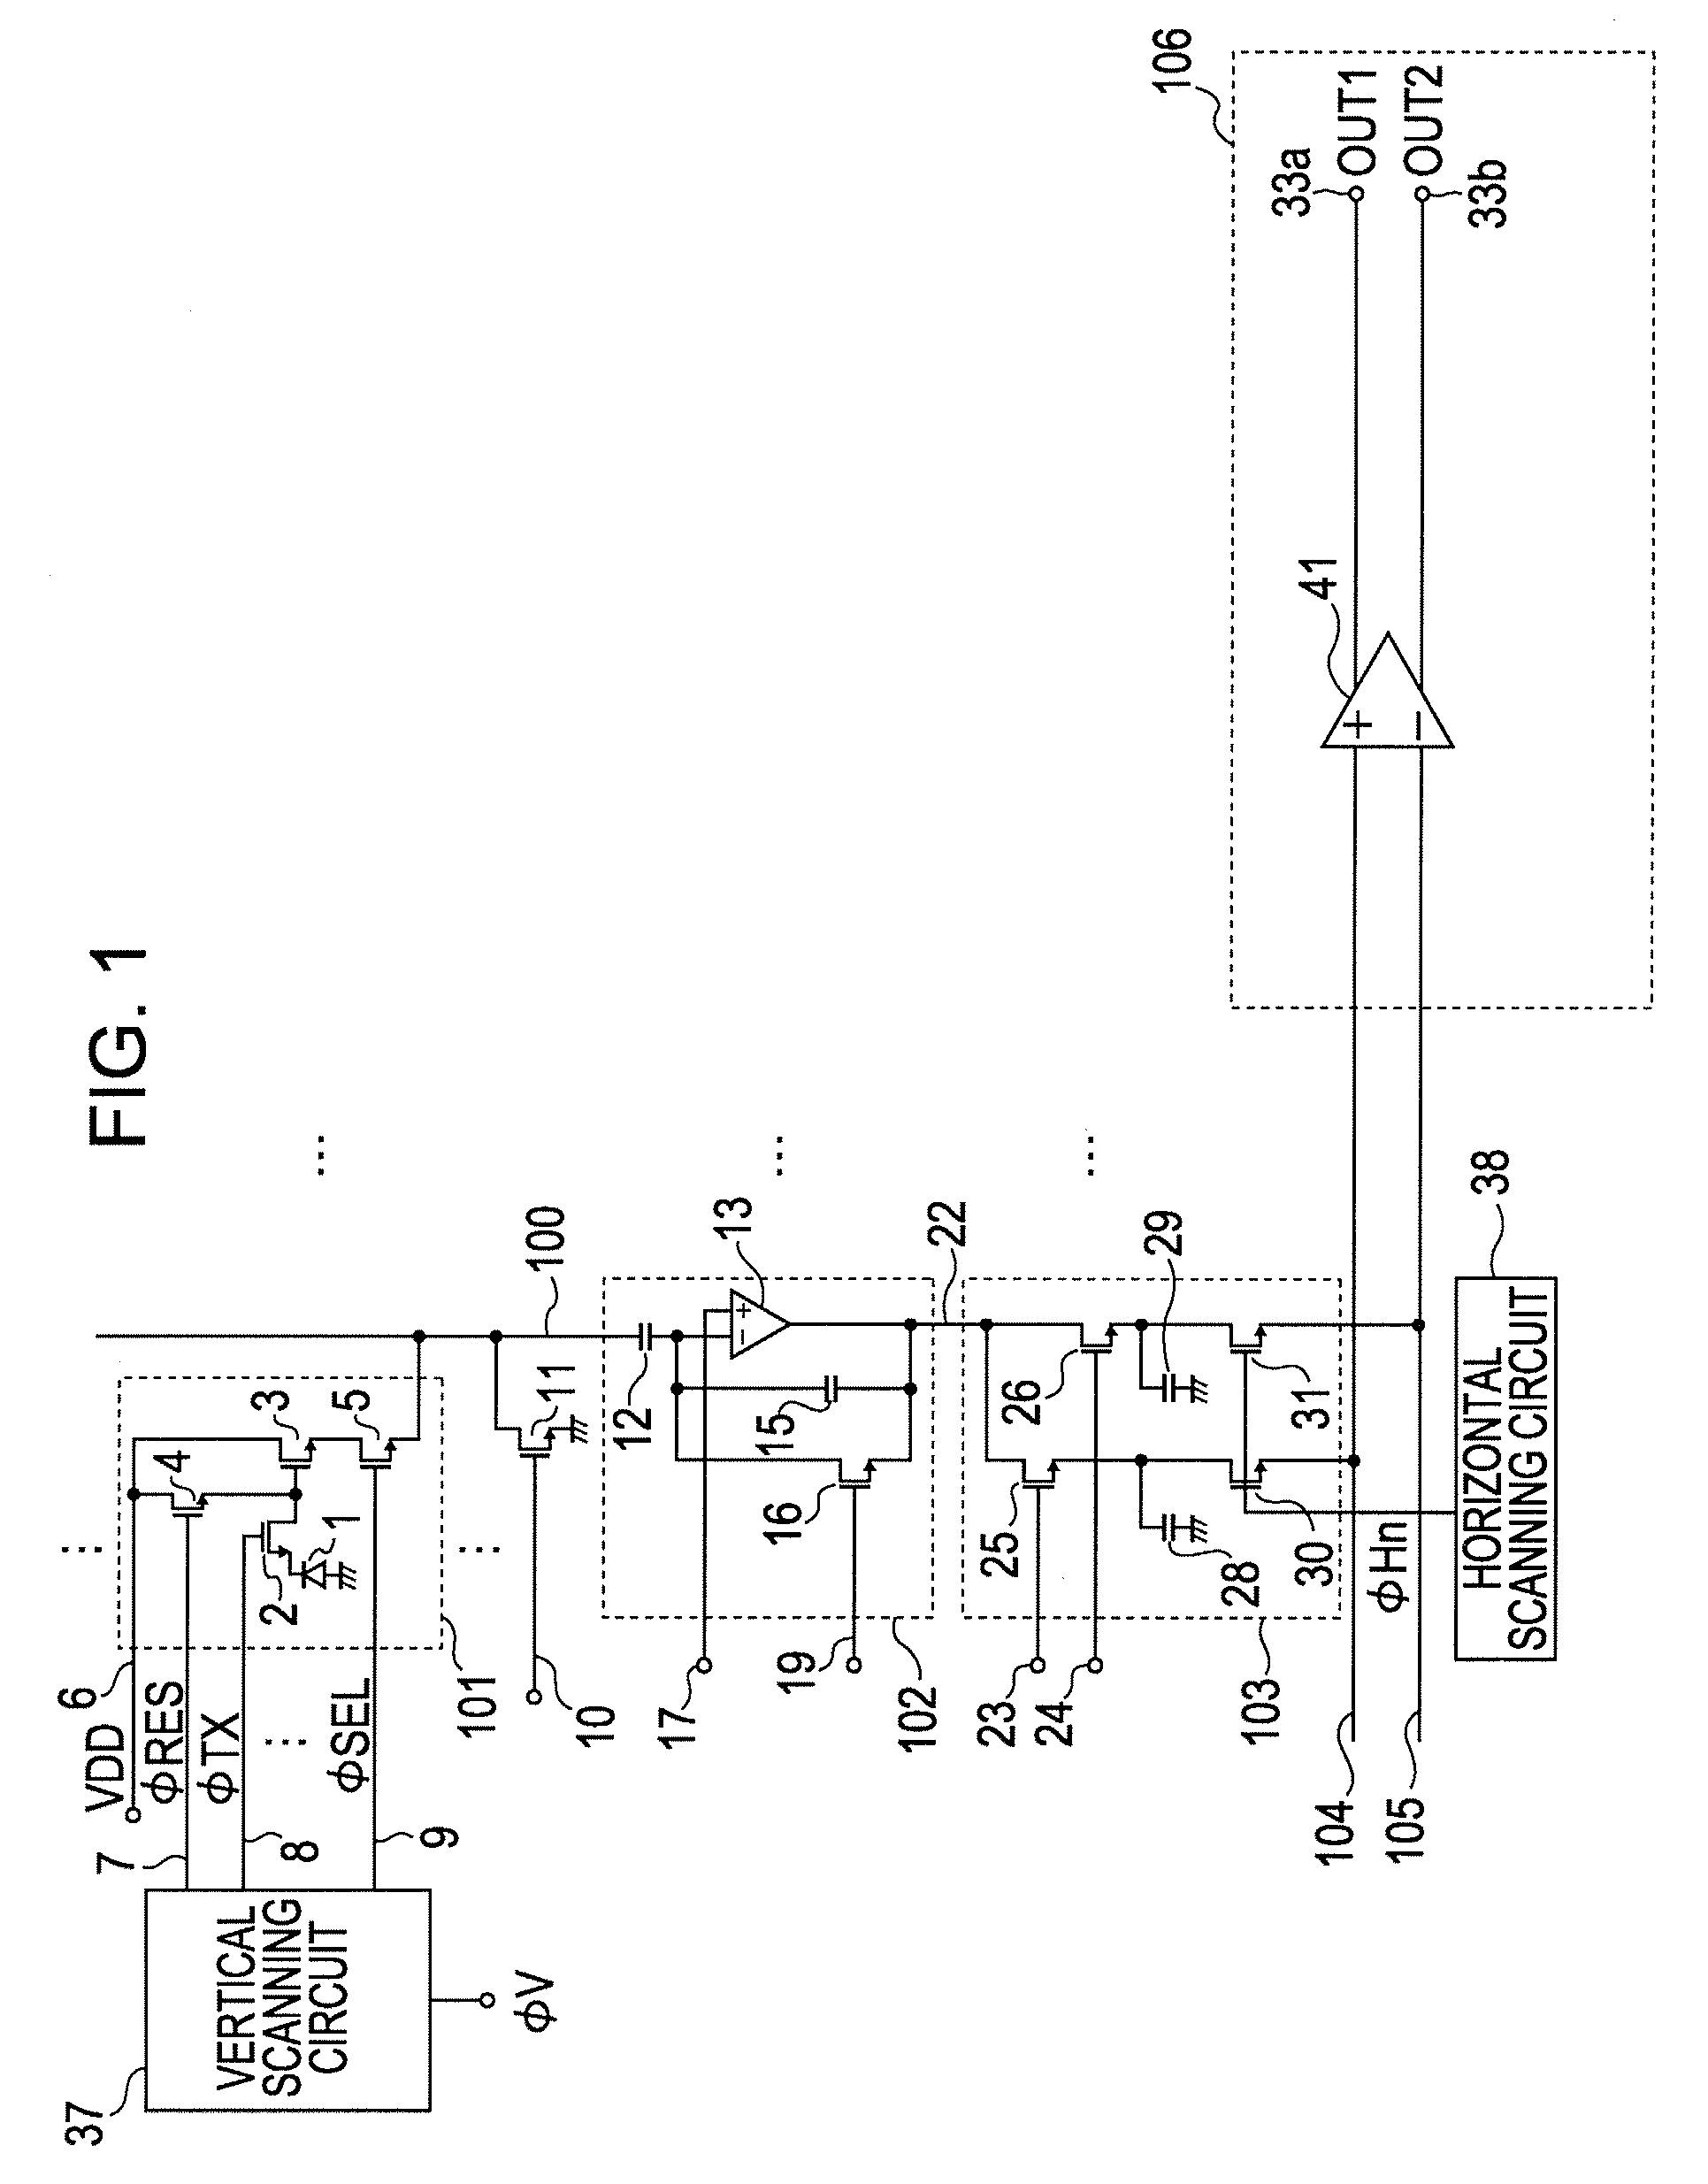 Photoelectric conversion apparatus with fully differential amplifier